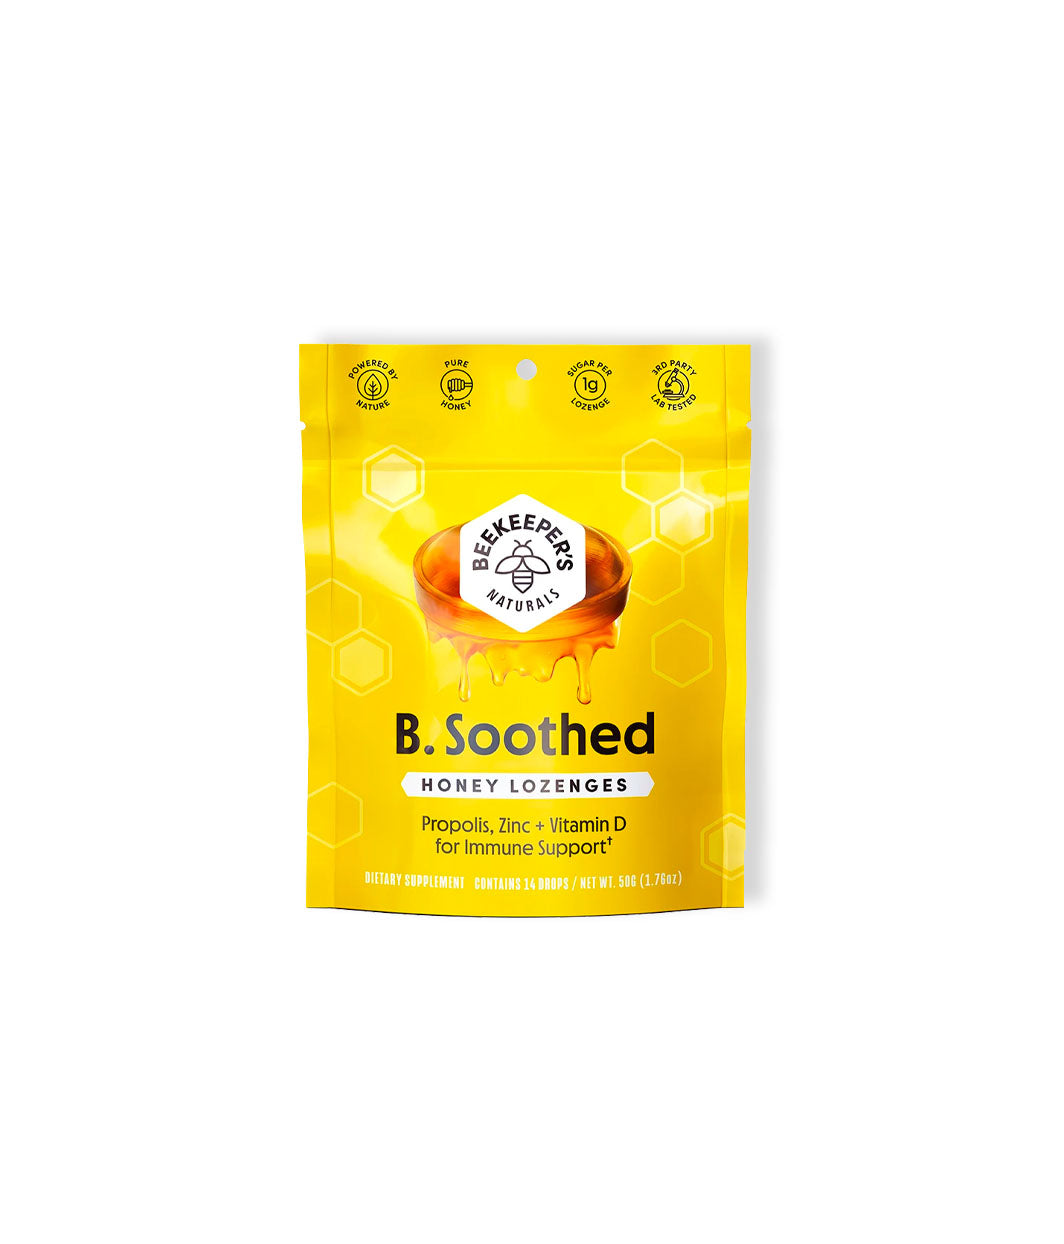 B.Soothed Honey Lozenges